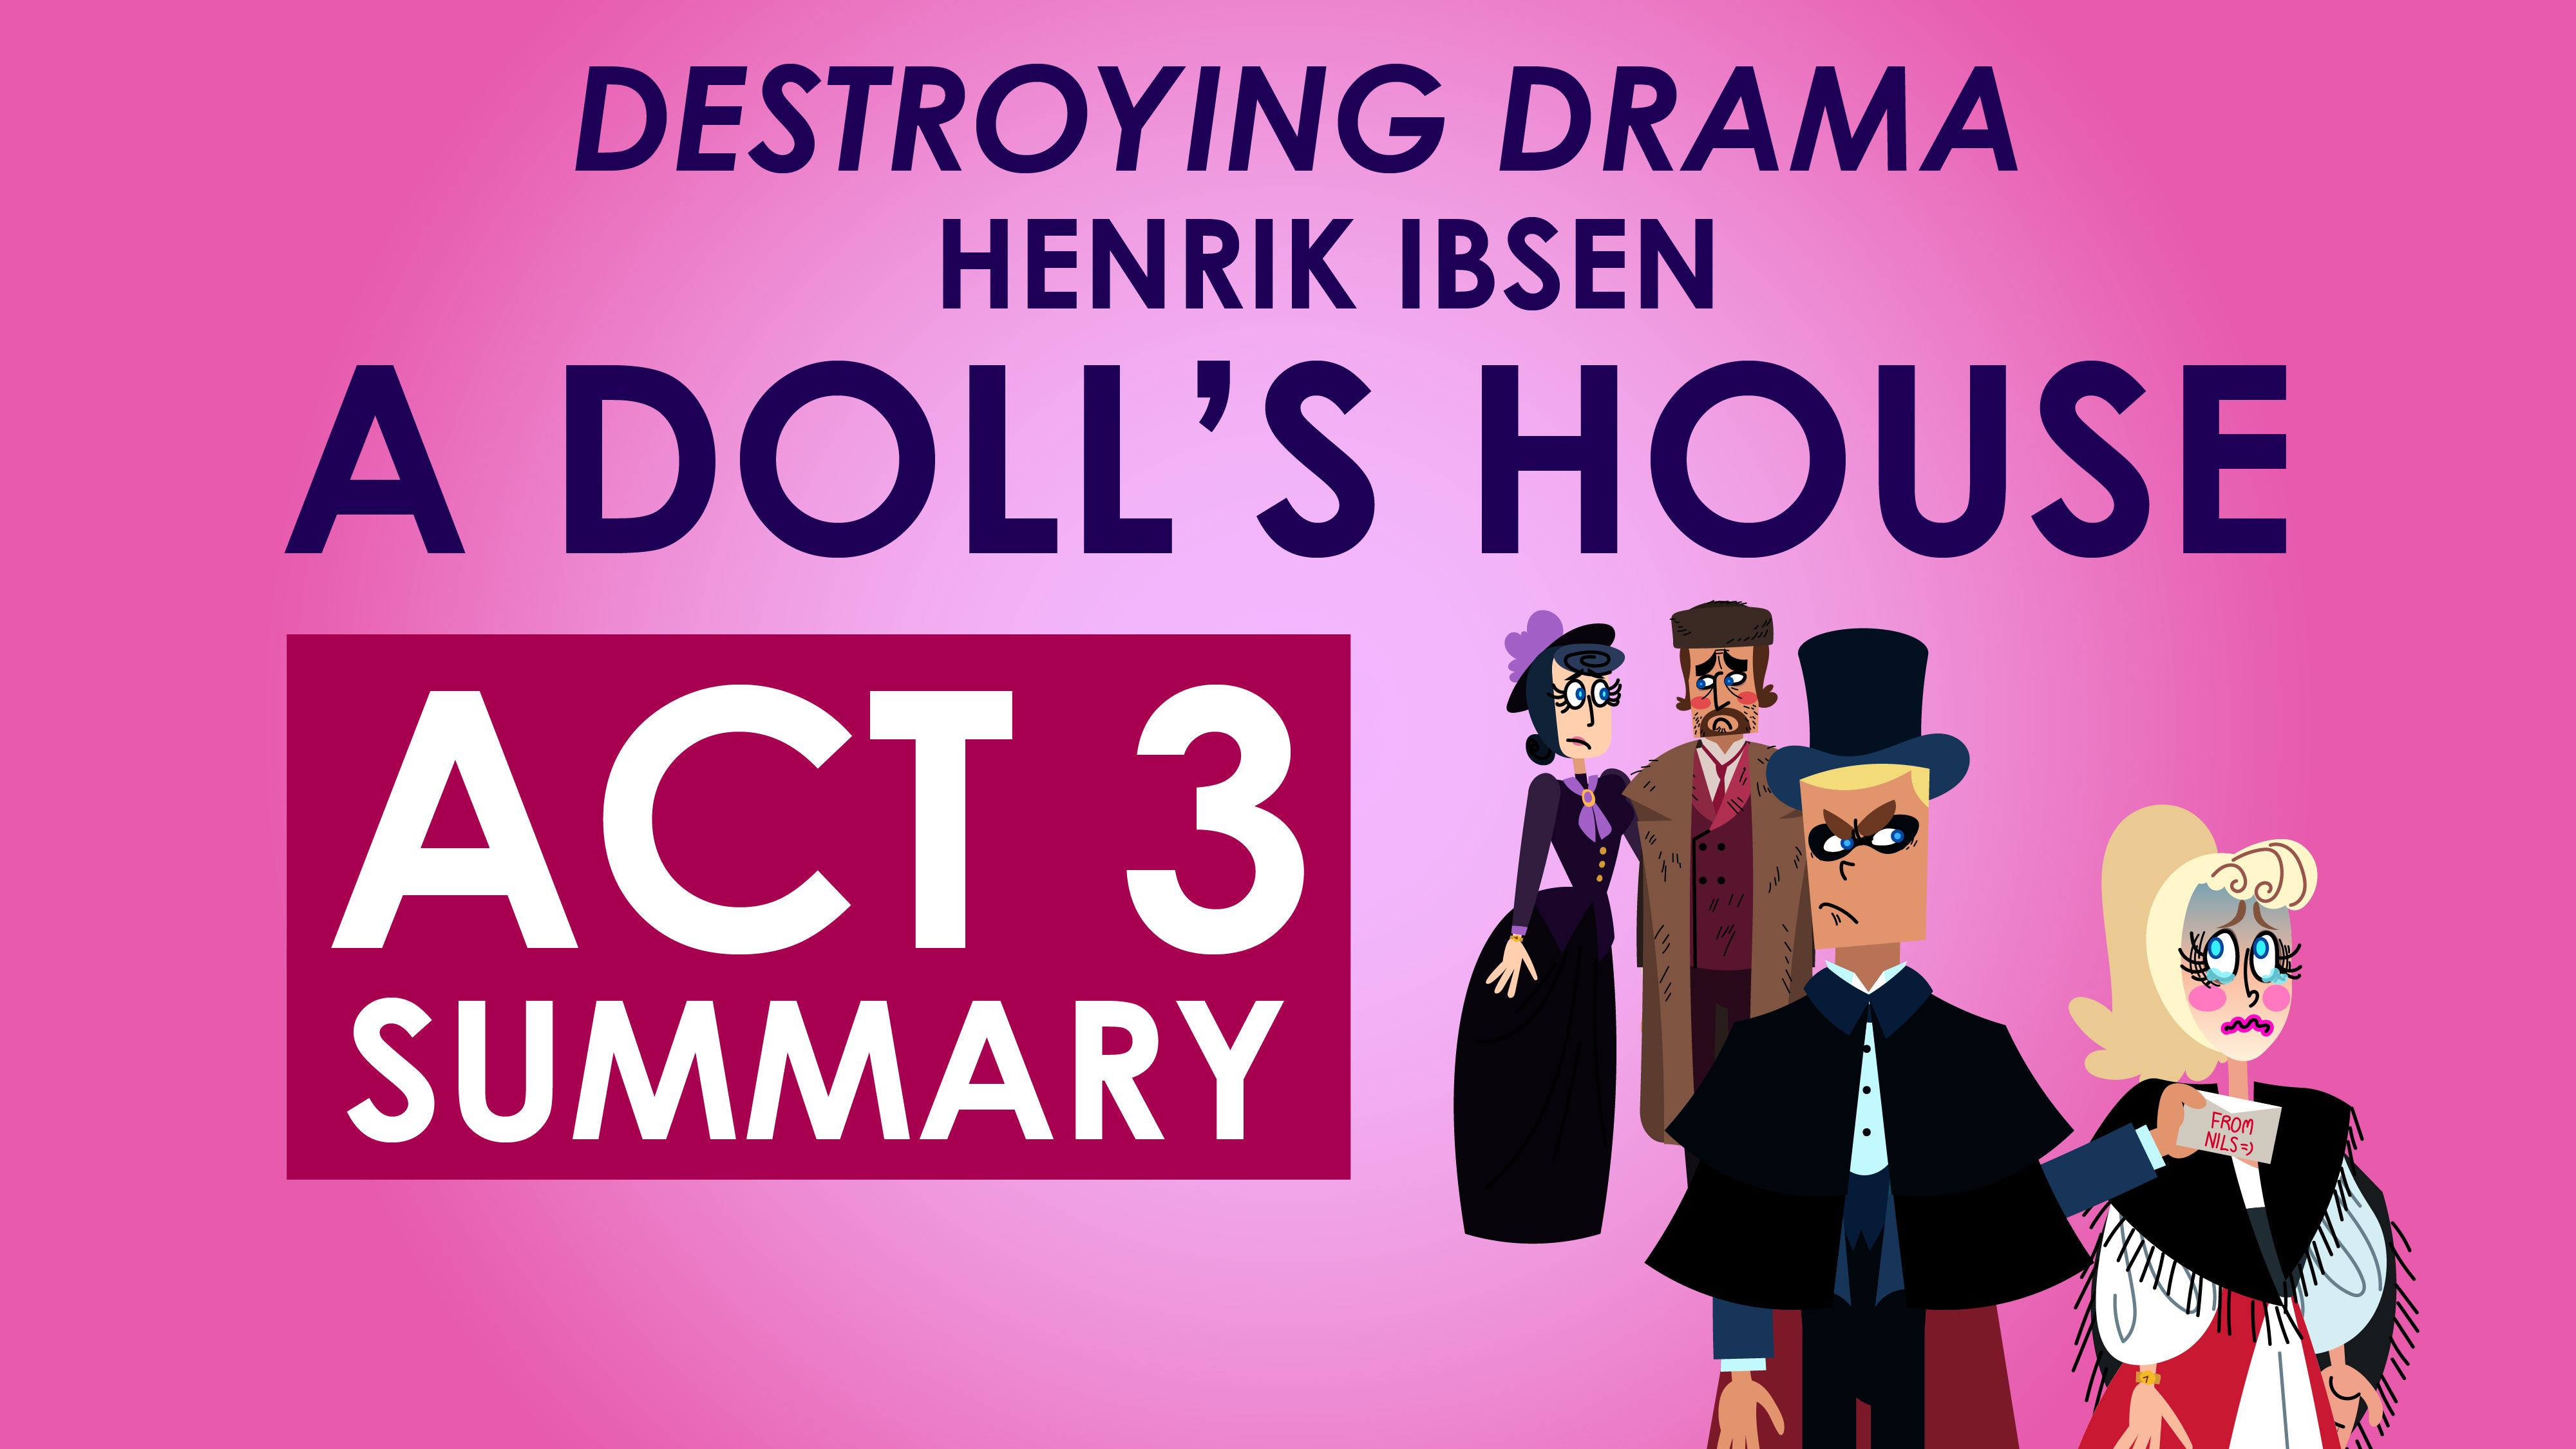 A Doll's House - Henrik Ibsen - Act 3 Summary - Destroying Drama Series	